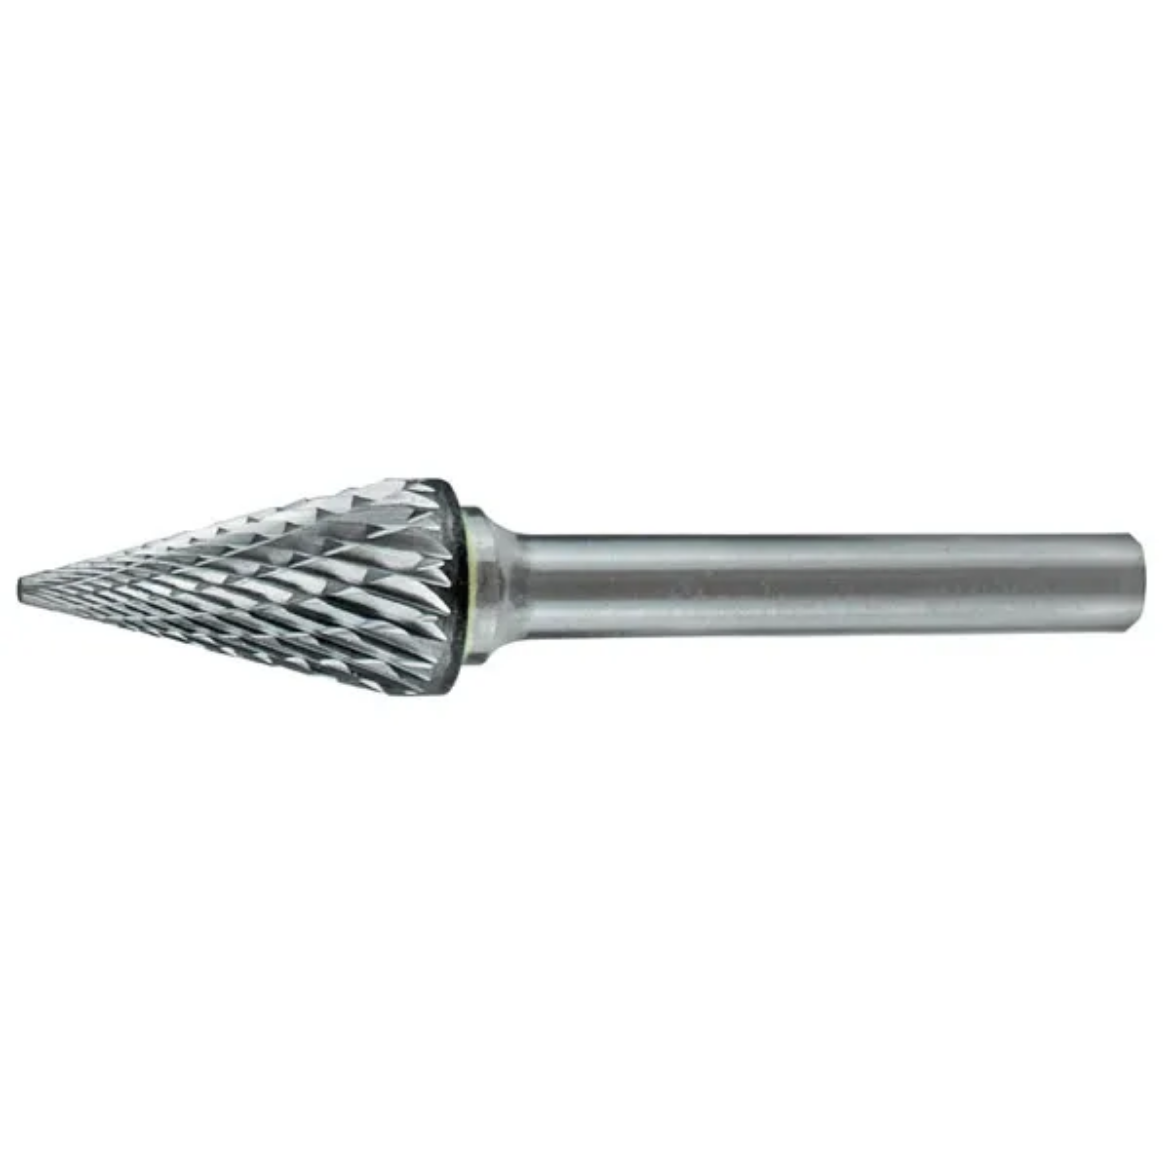 Picture of HOLEMAKER CARBIDE BURR, CONE SHAPE, 1/2" X 1" HEAD, 1/4" SHANK DC